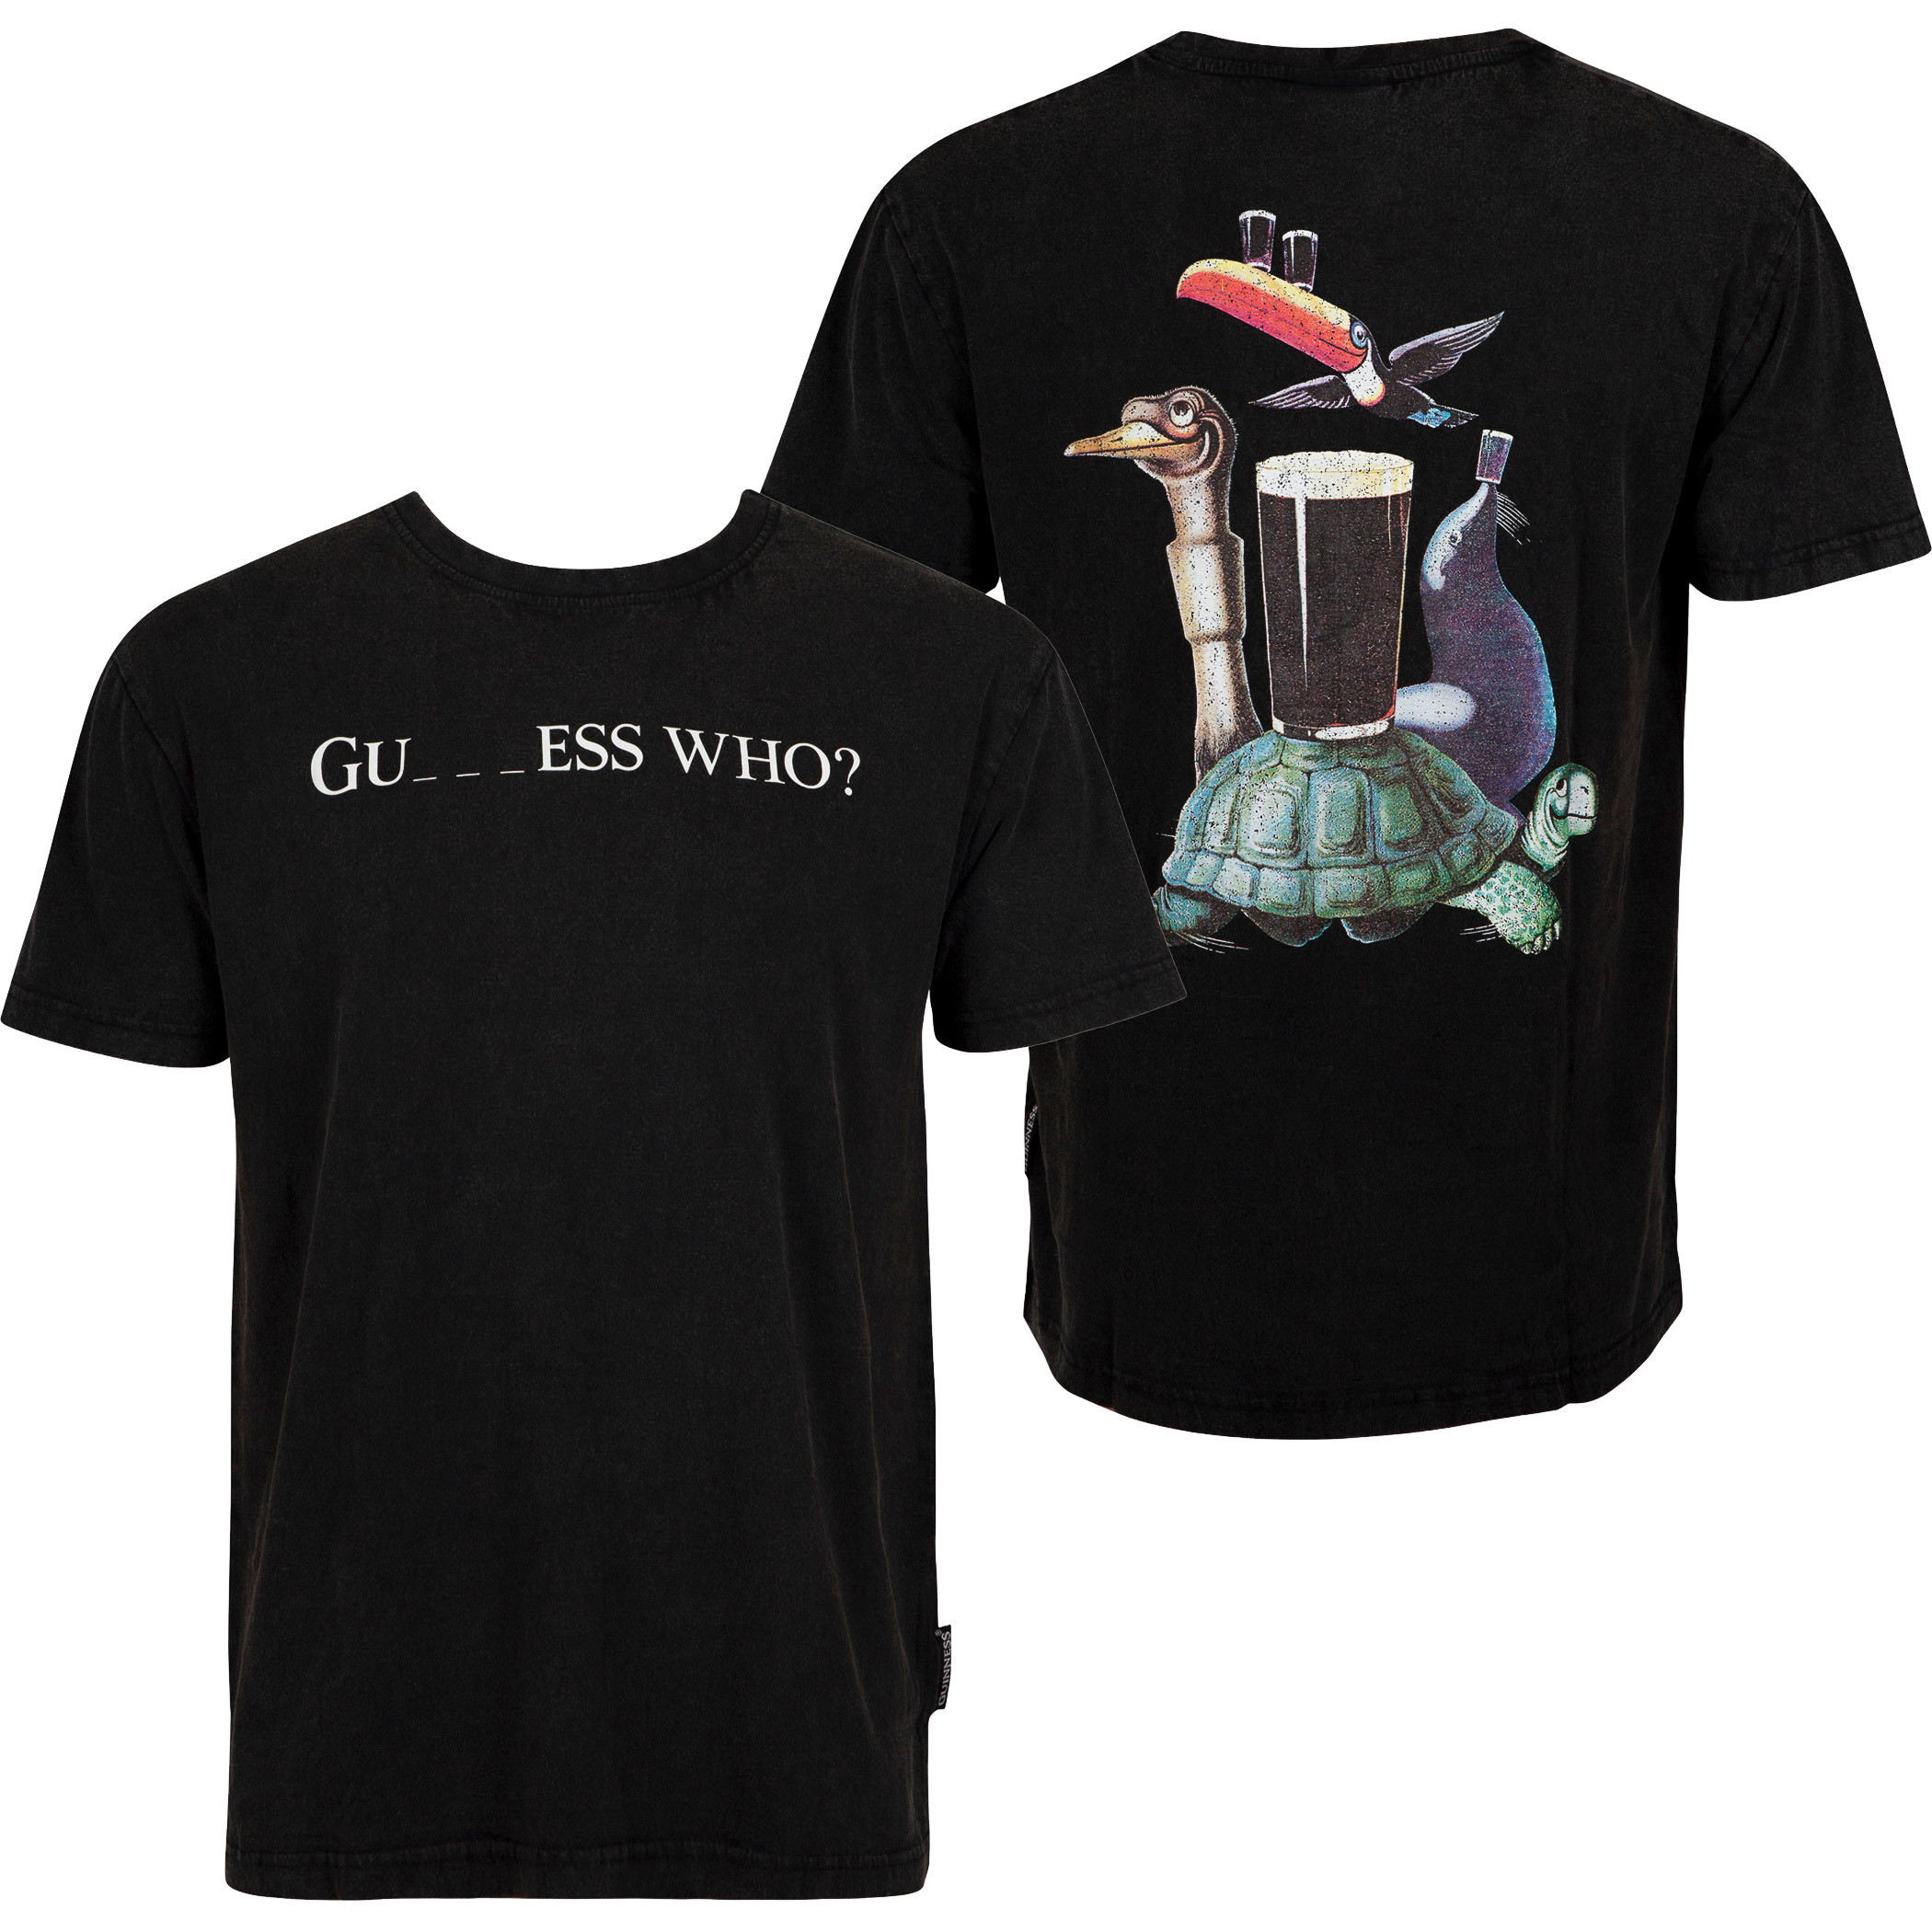 Guinness Guess Who? Black Tee Shirt